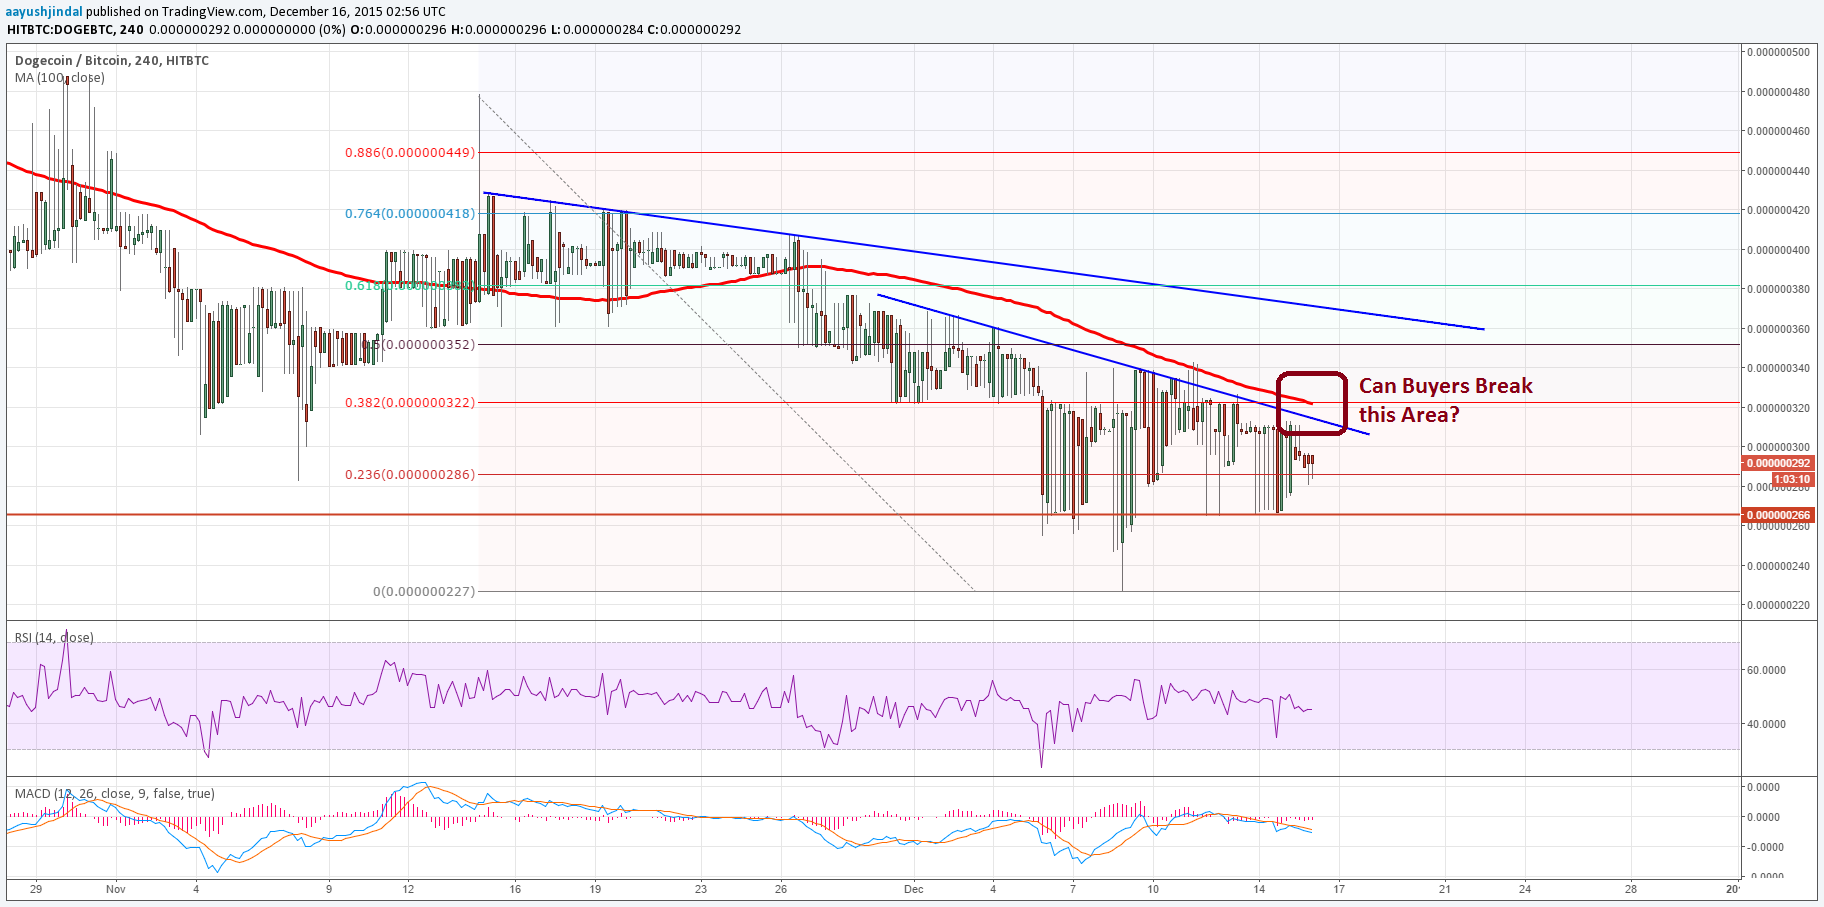 Dogecoin Price Analysis 15/12/2015 - Risk of Further Declines